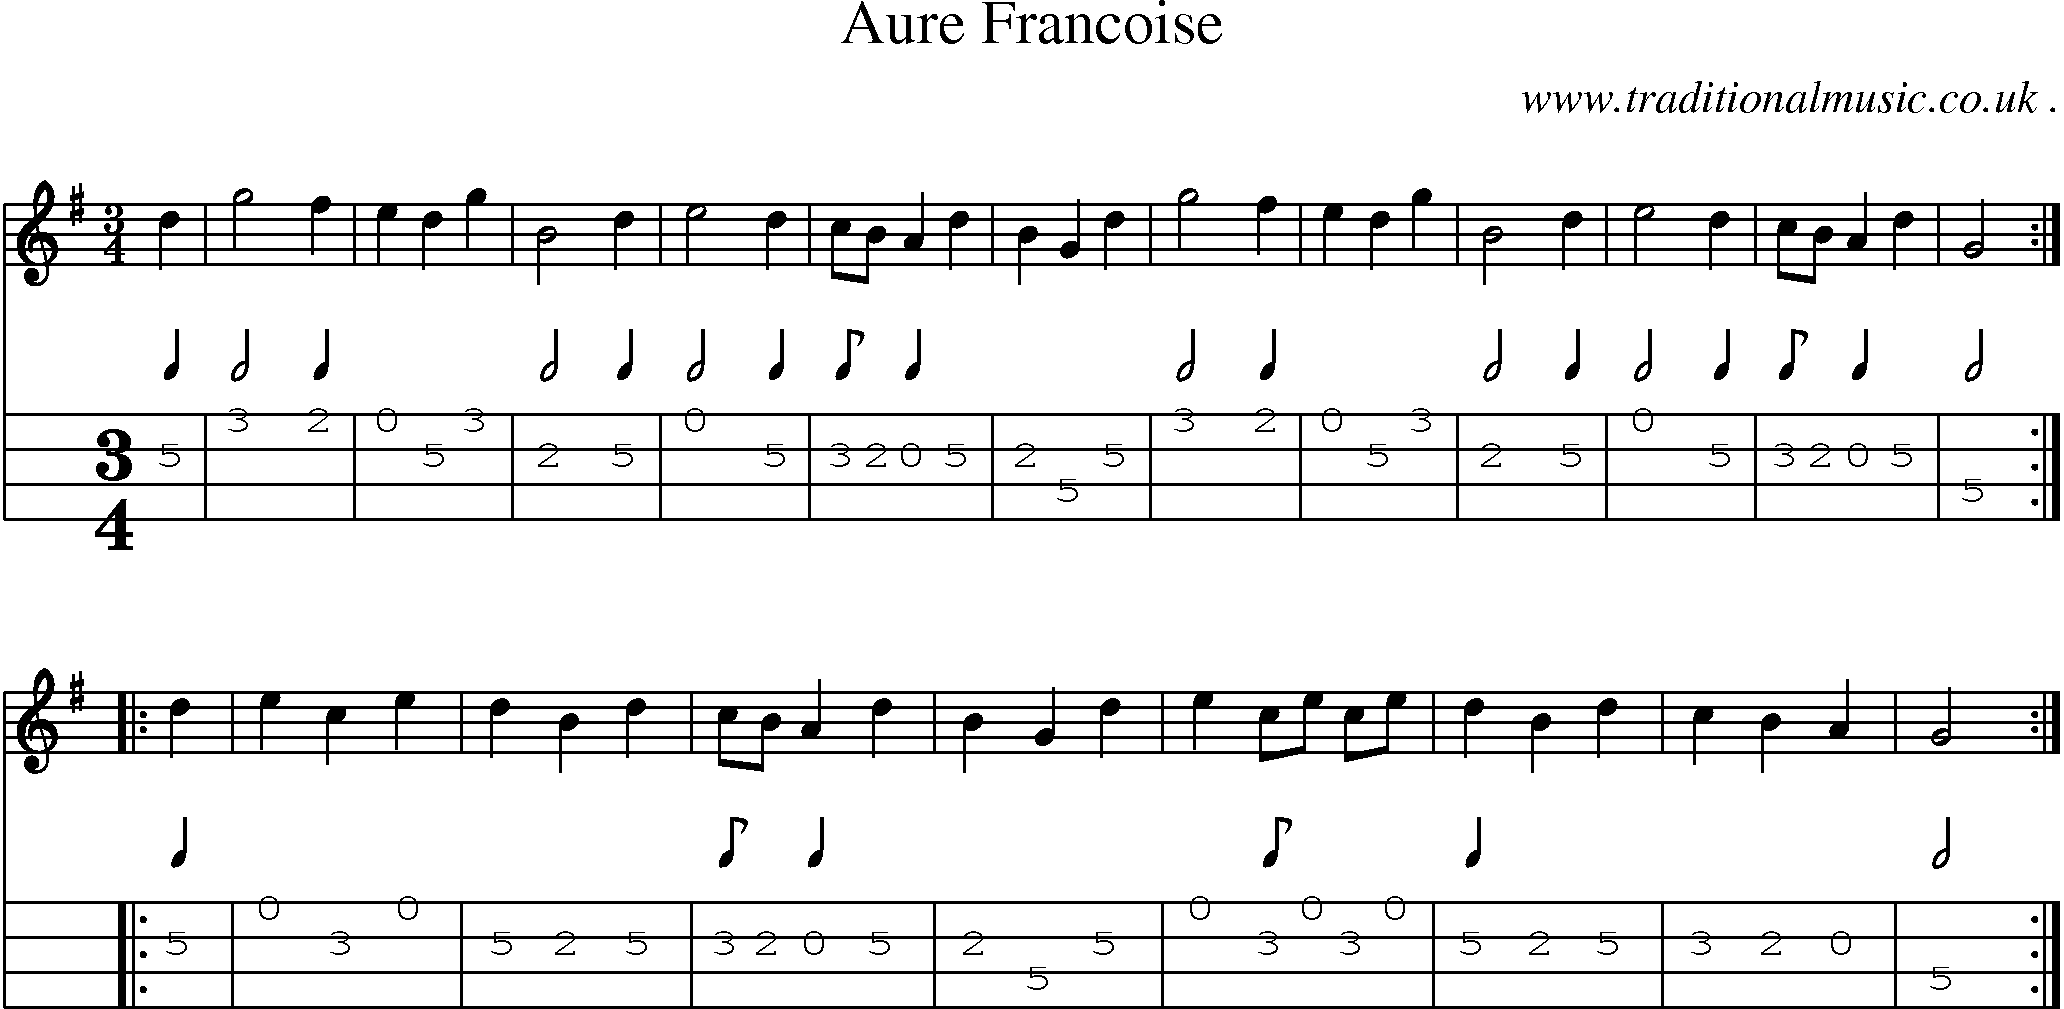 Sheet-Music and Mandolin Tabs for Aure Francoise